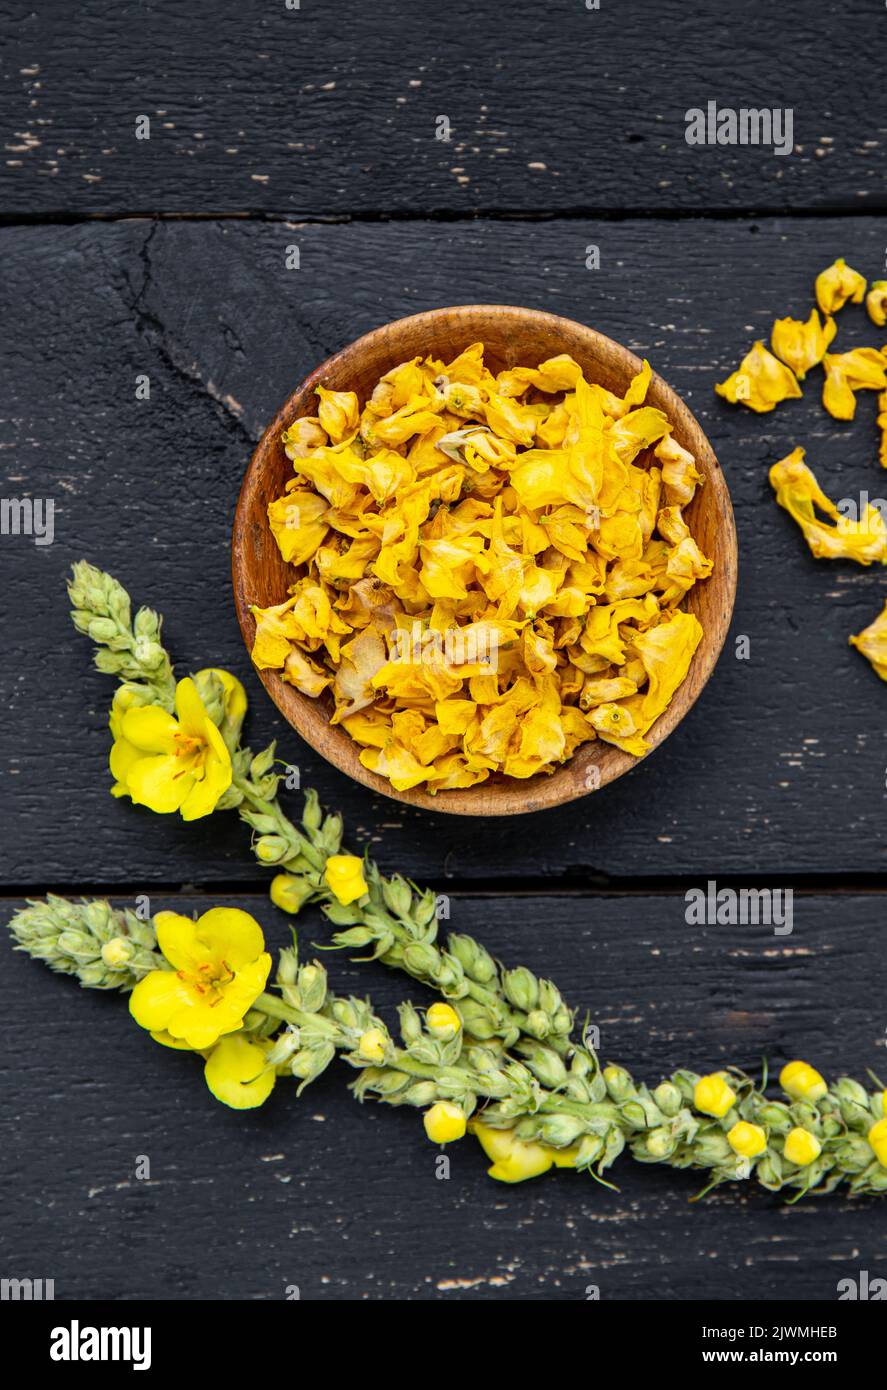 Herbal medicine tea powder made of Verbascum thapsus, the great mullein, greater mullein or common mullein. Yellow dried flower petals on wood bowl. Stock Photo